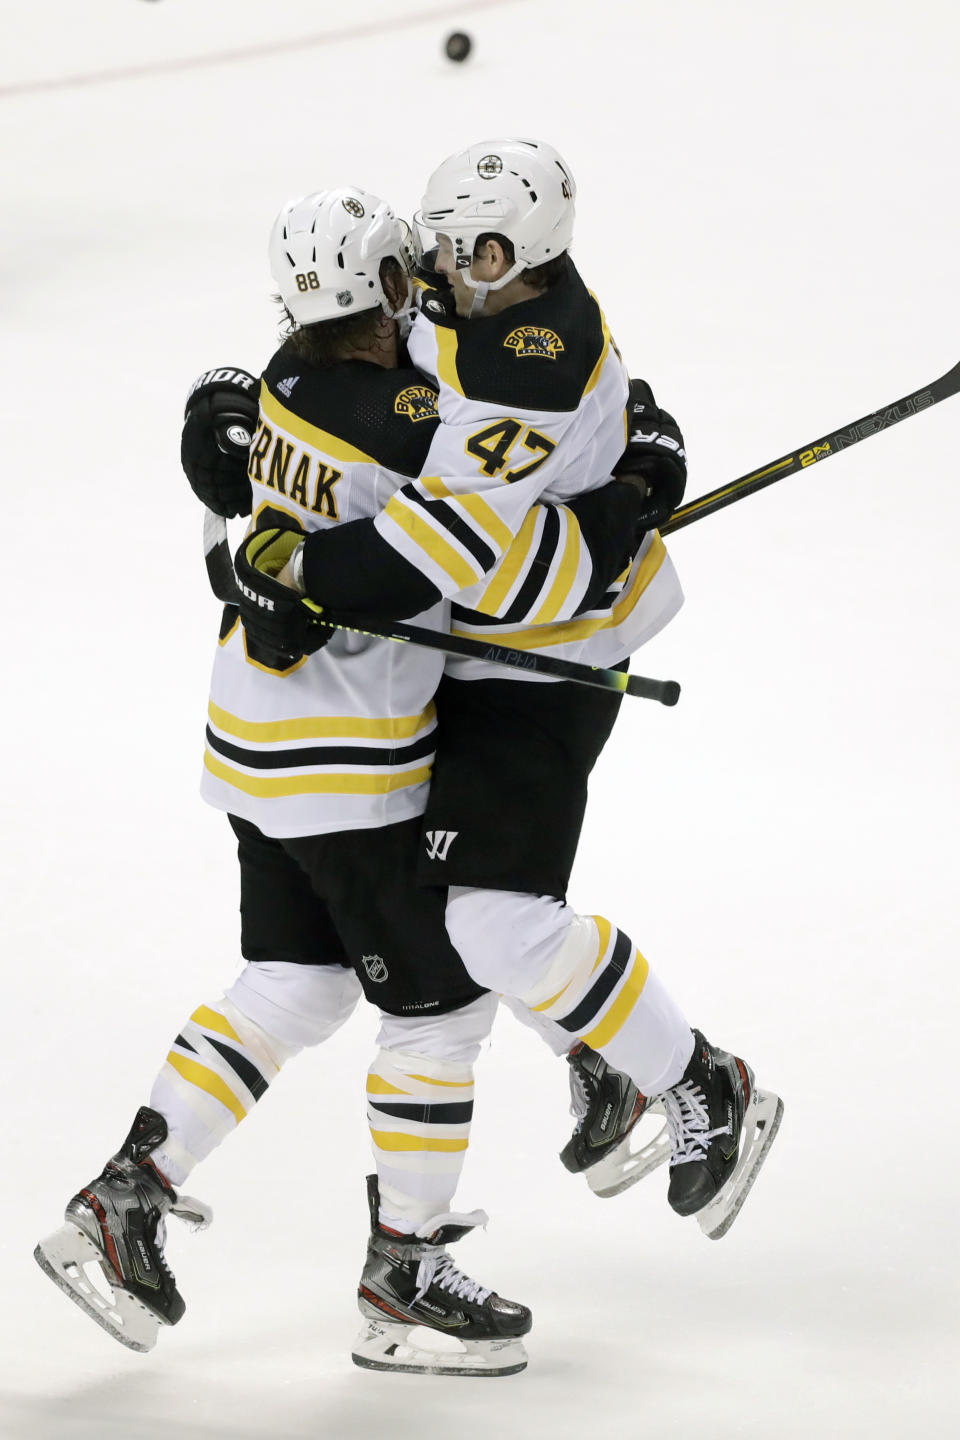 Boston Bruins right wing David Pastrnak (88) celebrates with defenseman Torey Krug (47) after Krug scored the winning goal during an overtime period of an NHL hockey game against the Florida Panthers, Thursday, March 5, 2020, in Sunrise, Fla. (AP Photo/Wilfredo Lee)